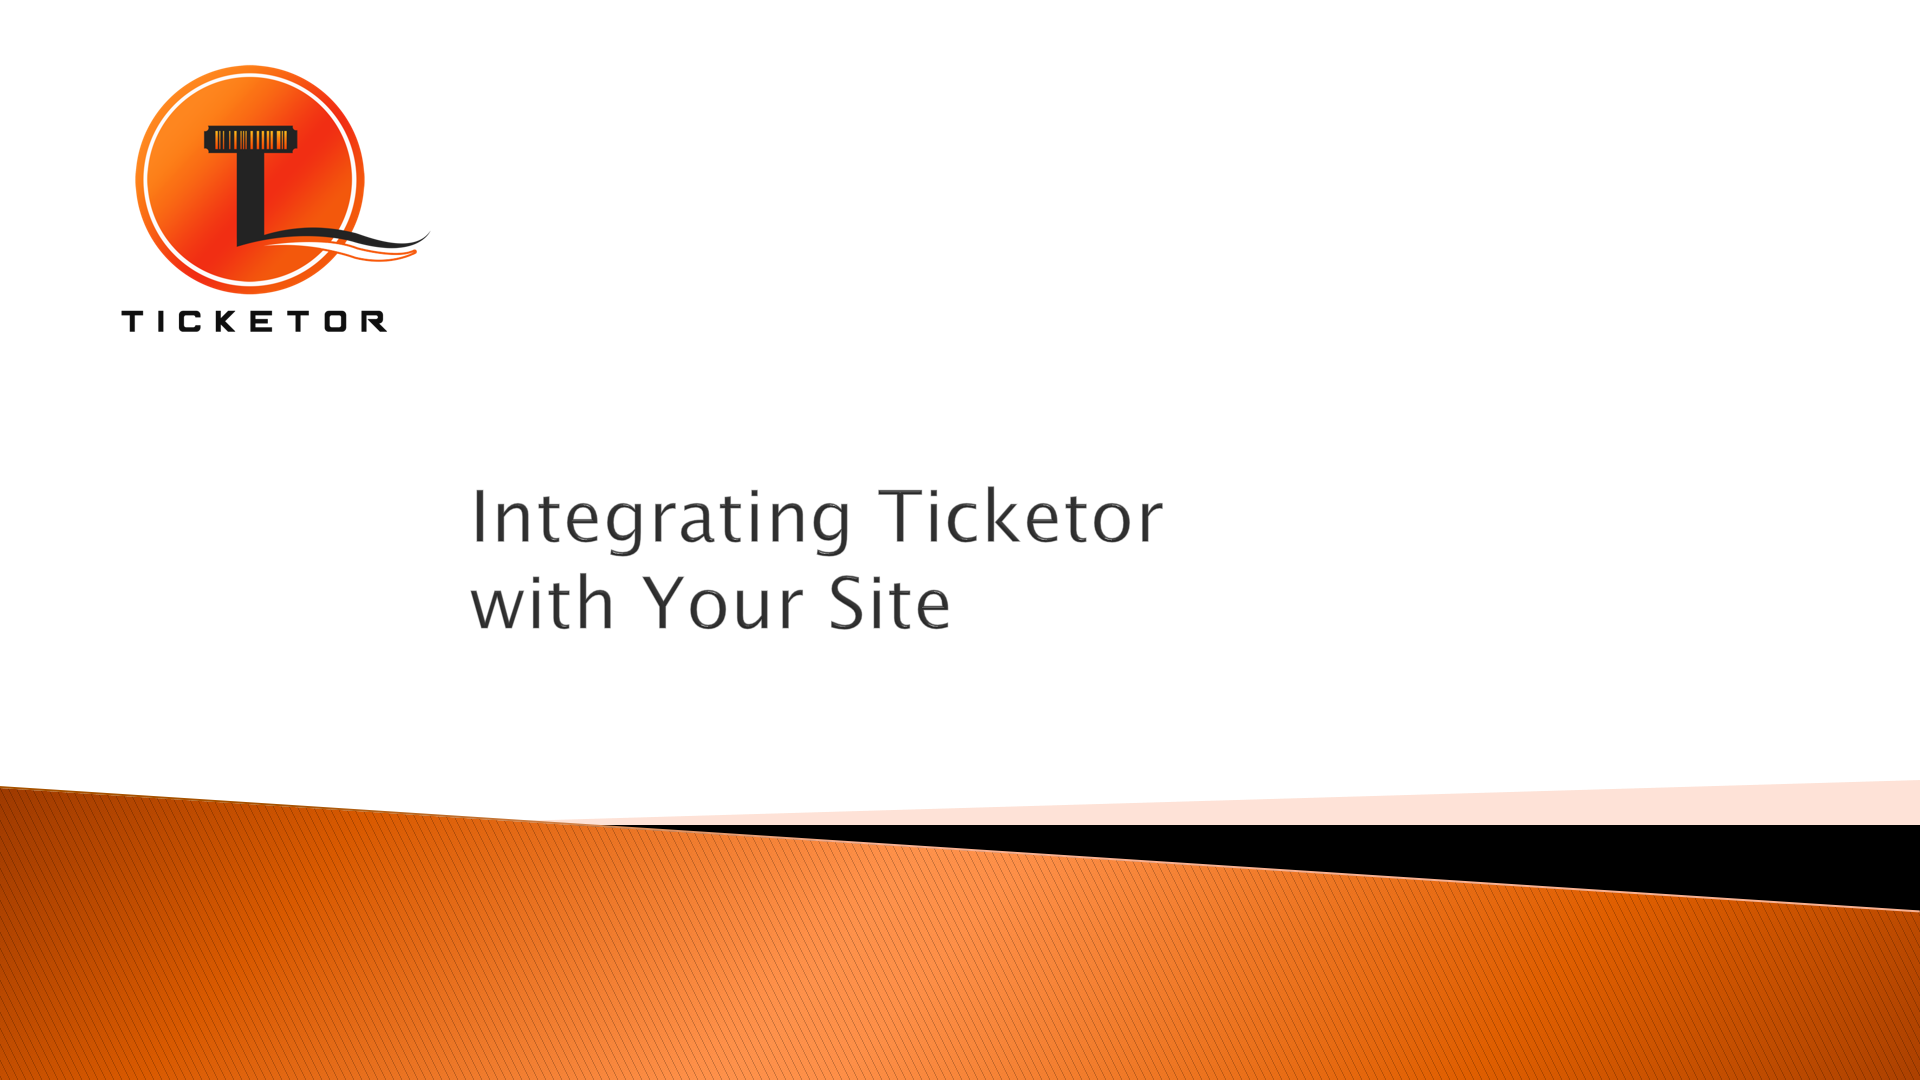 Integrating Ticketor with Your Site